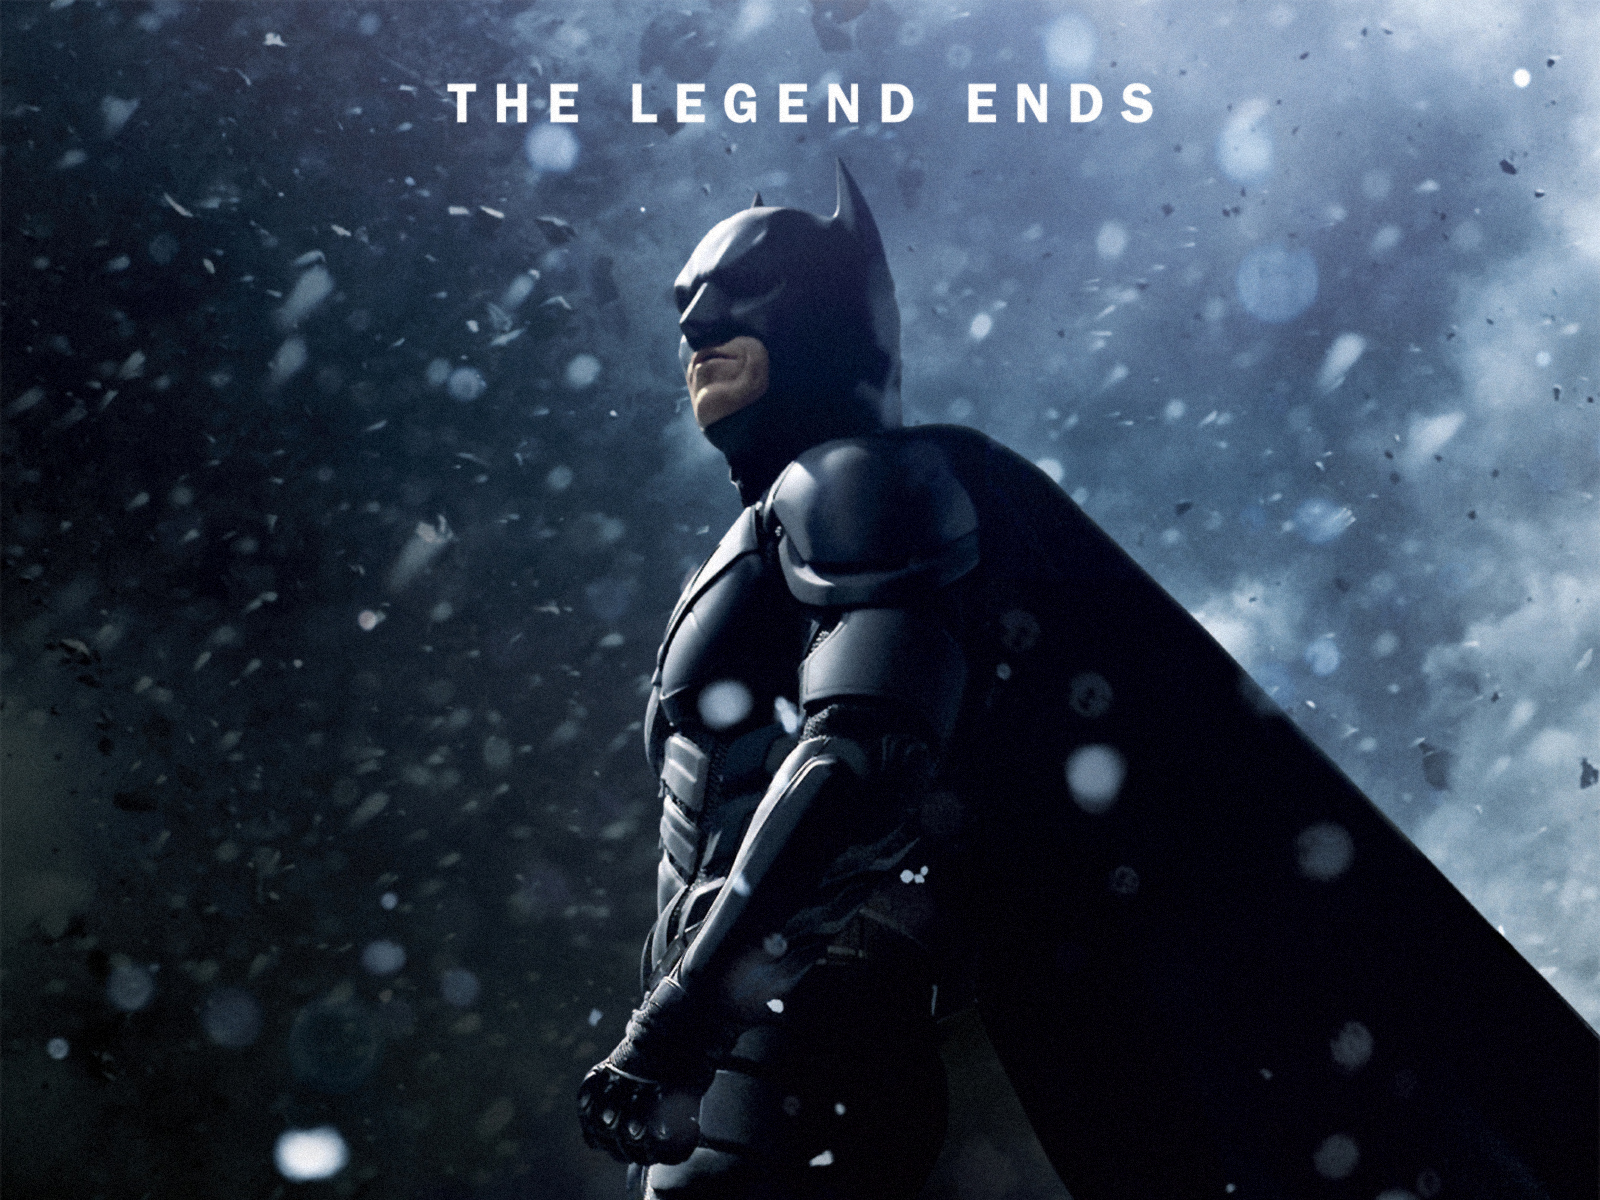 The Dark Knight Rises wallpapers 16001200 3